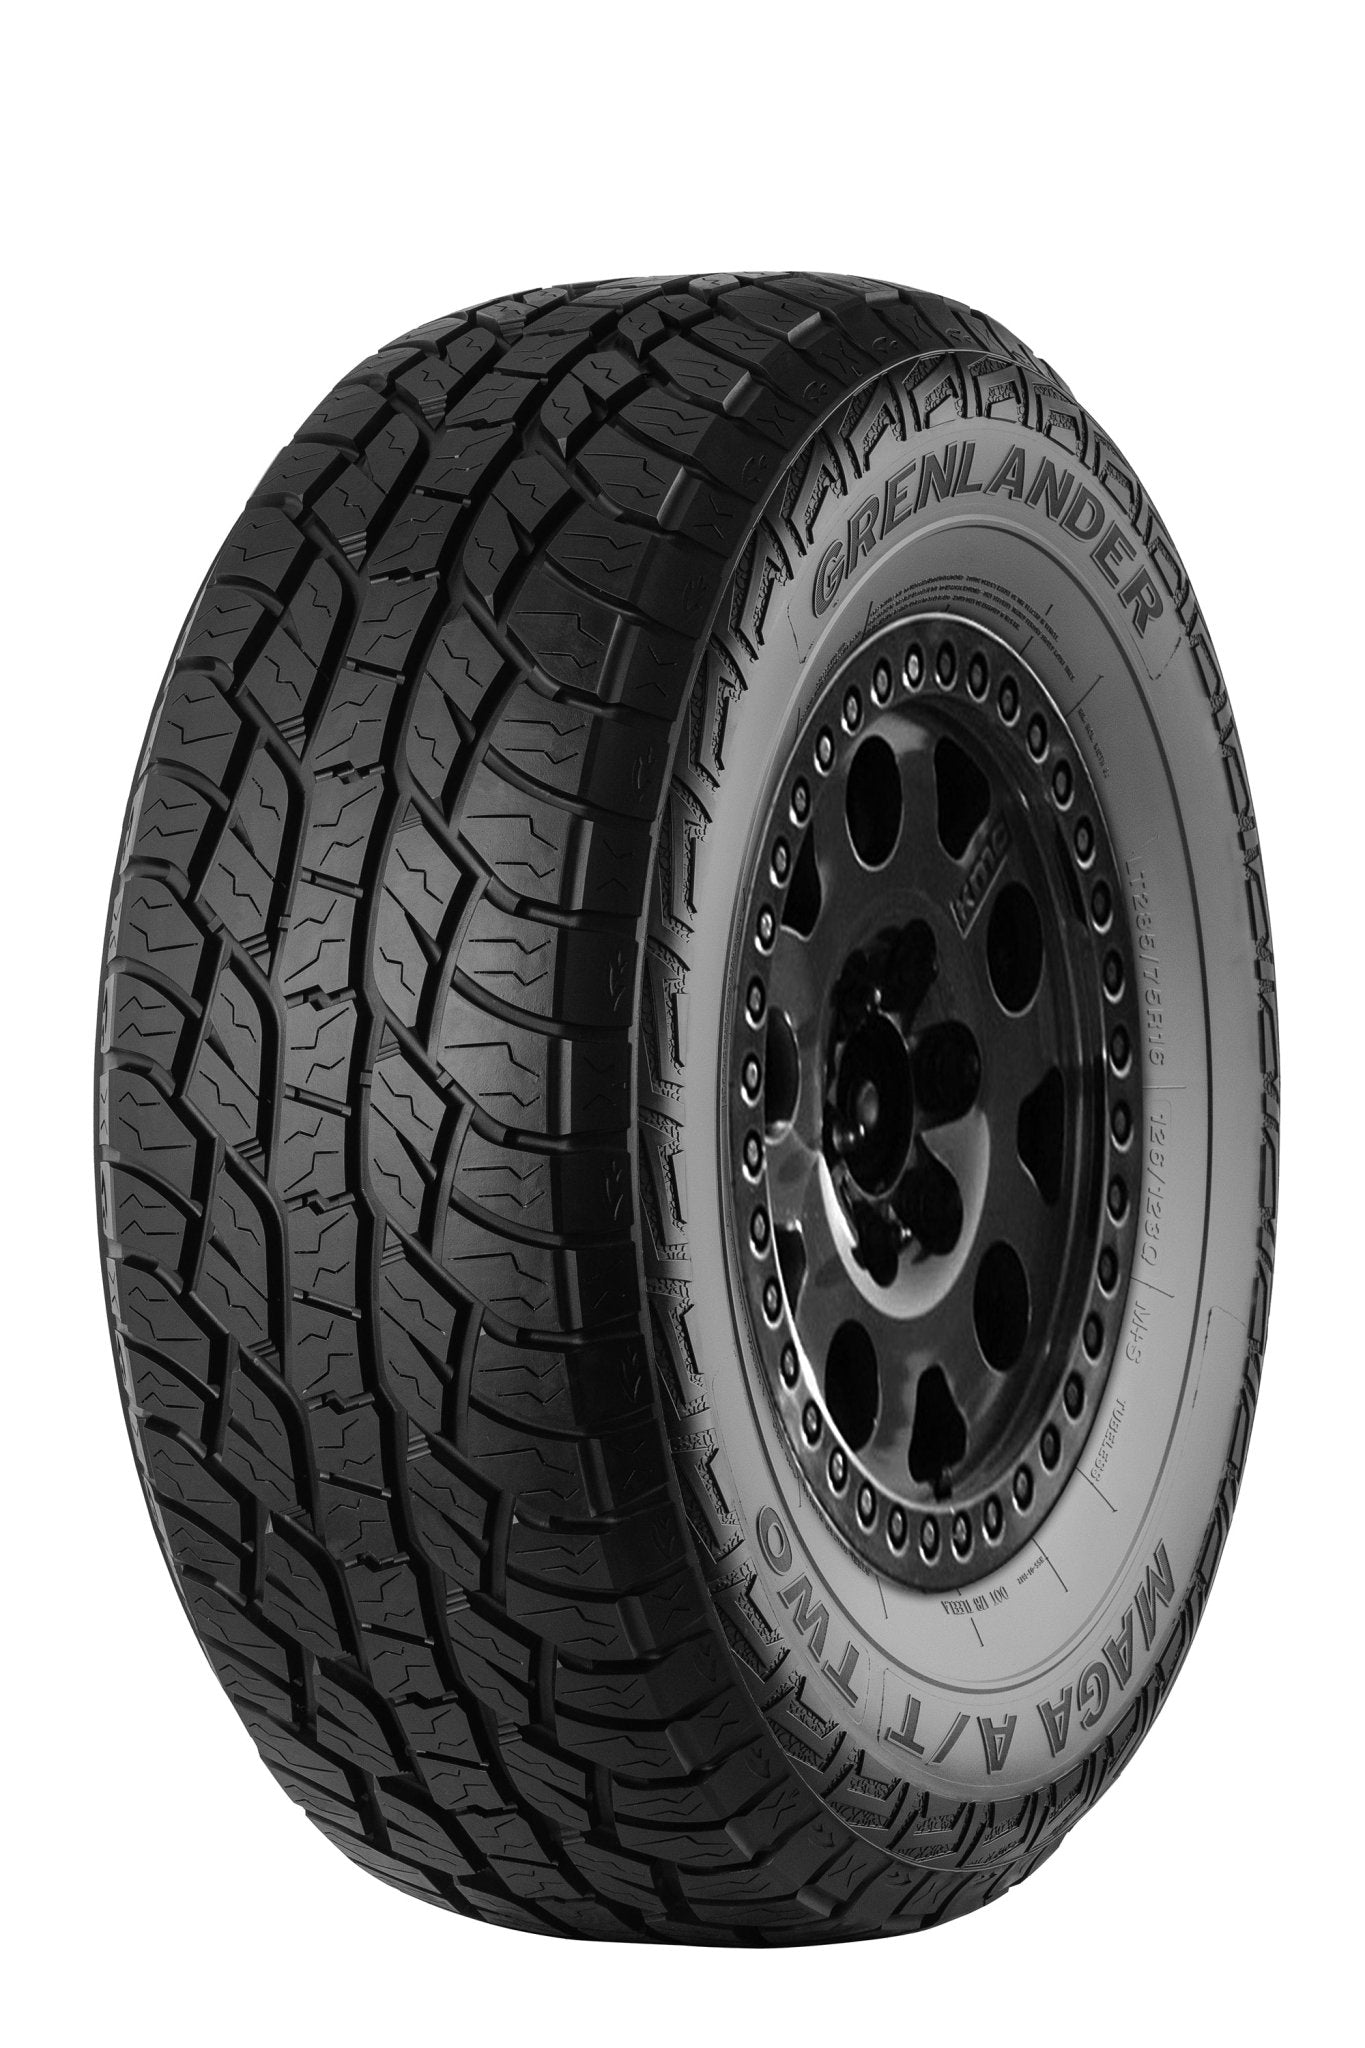 285/70R17 GRENLANDER MAGA A/T TWO LIGHT TRUCK - Toee Tire